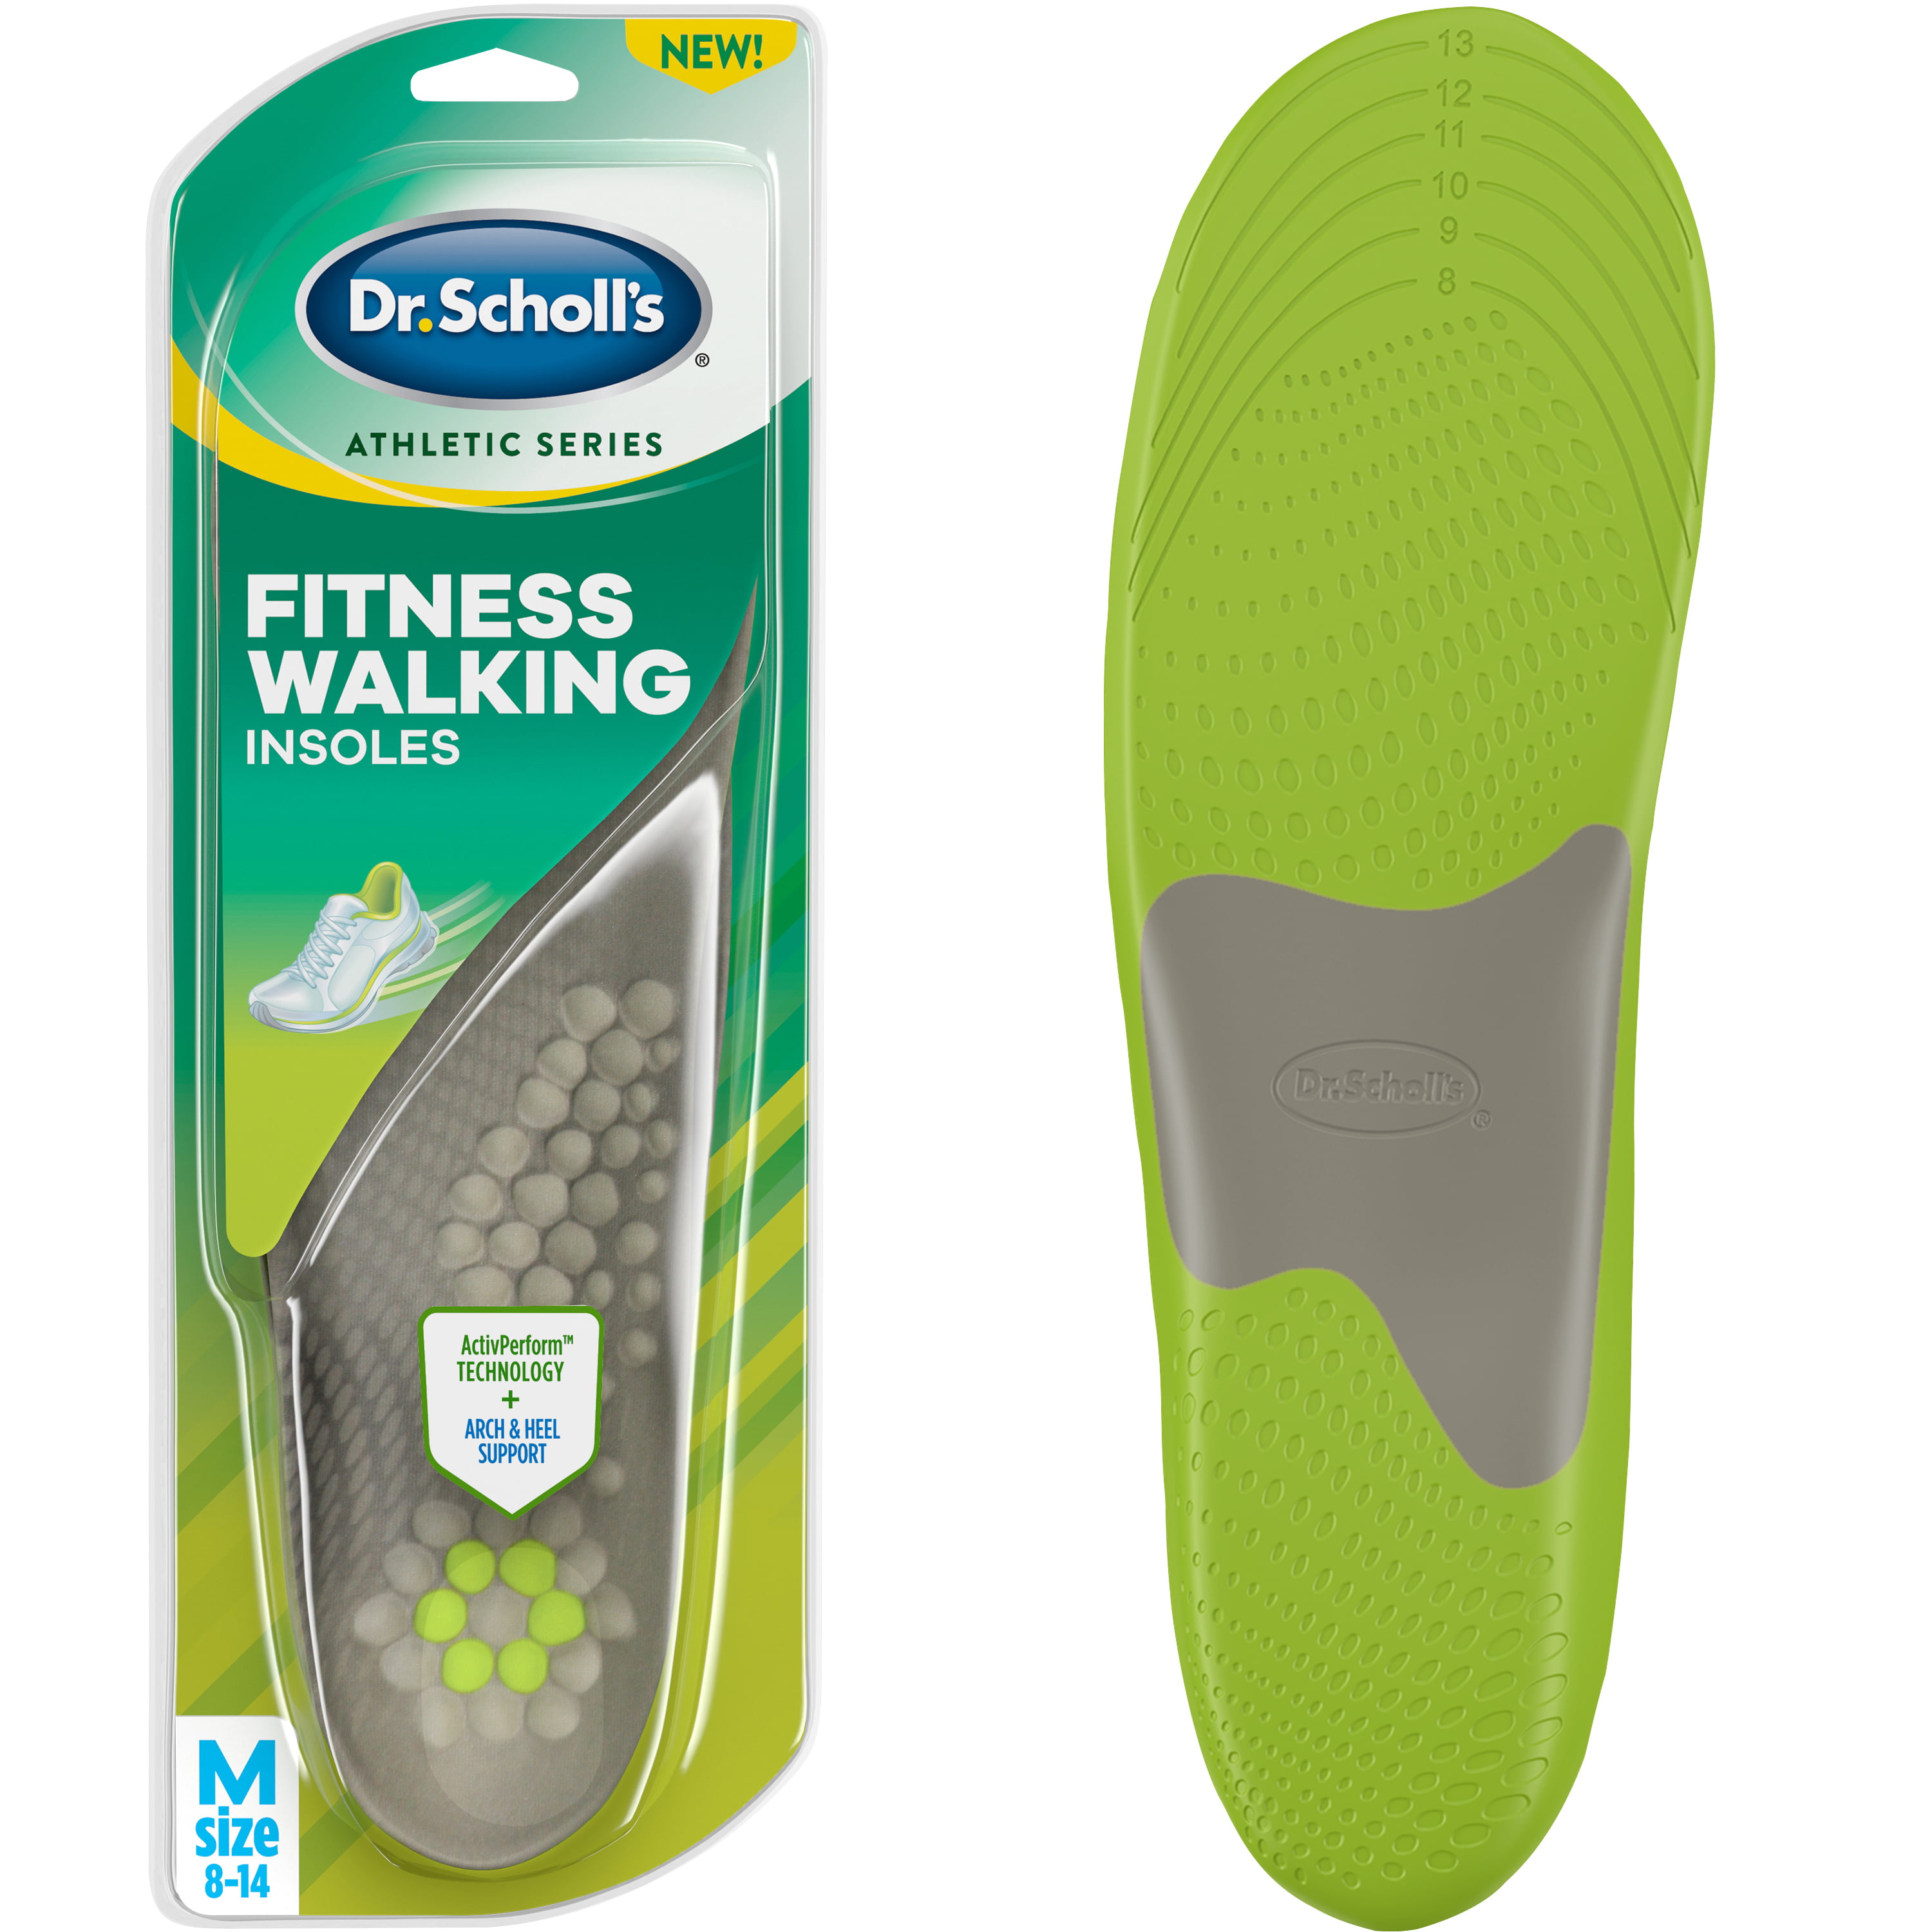 Dr. Scholl's Fitness Walking Insoles for Men (8-14) Inserts to Reduce ...